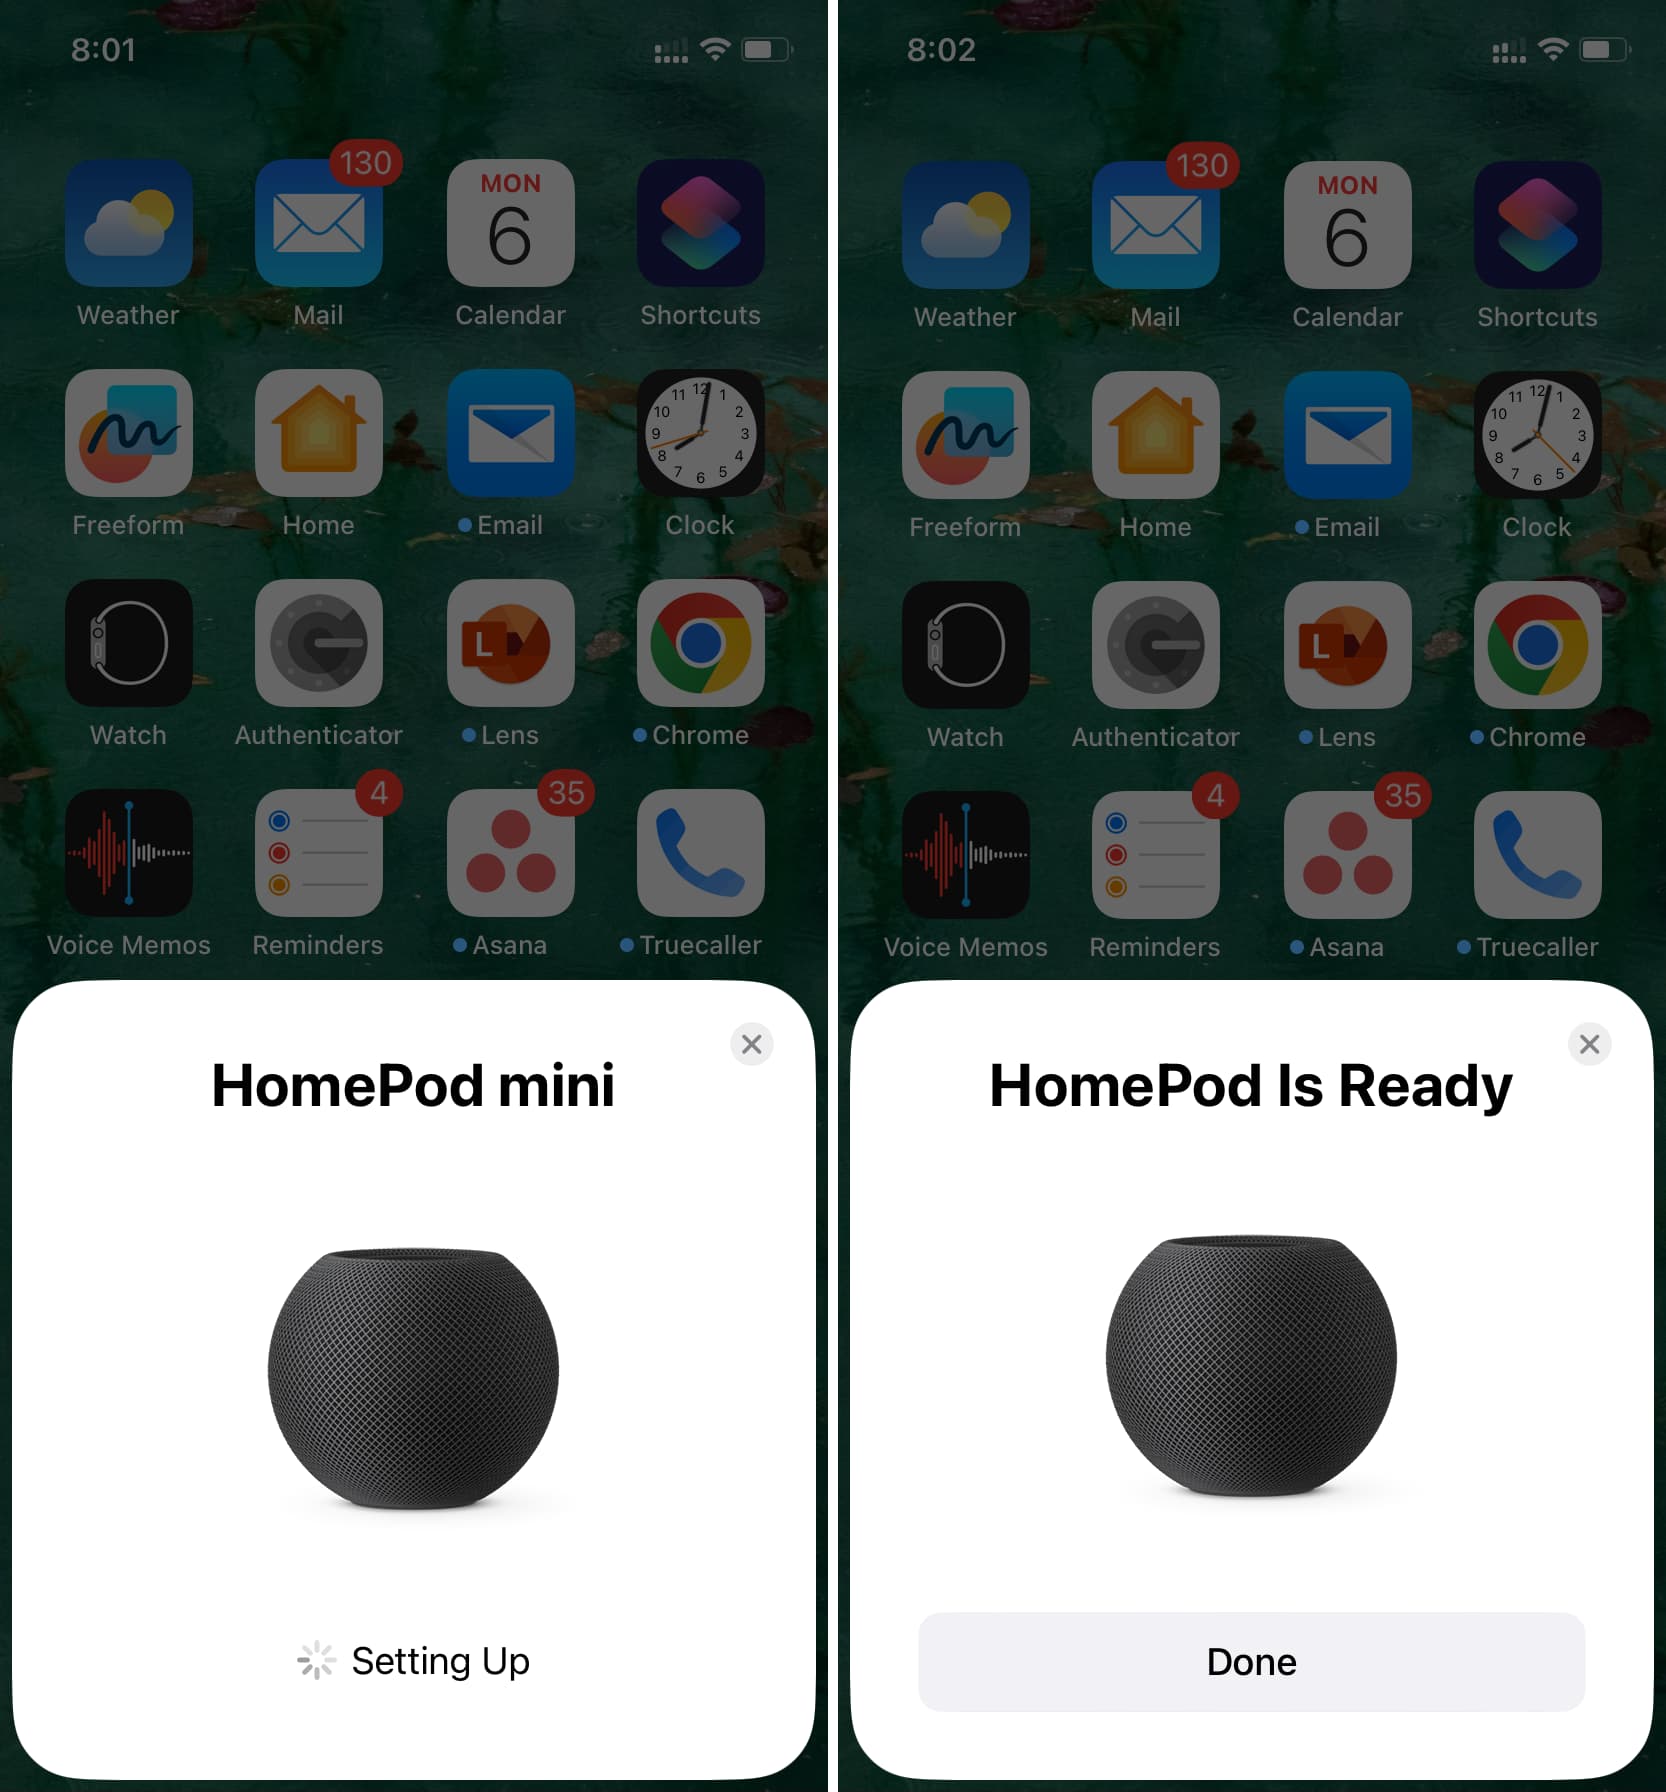 HomePod is setup and ready for use